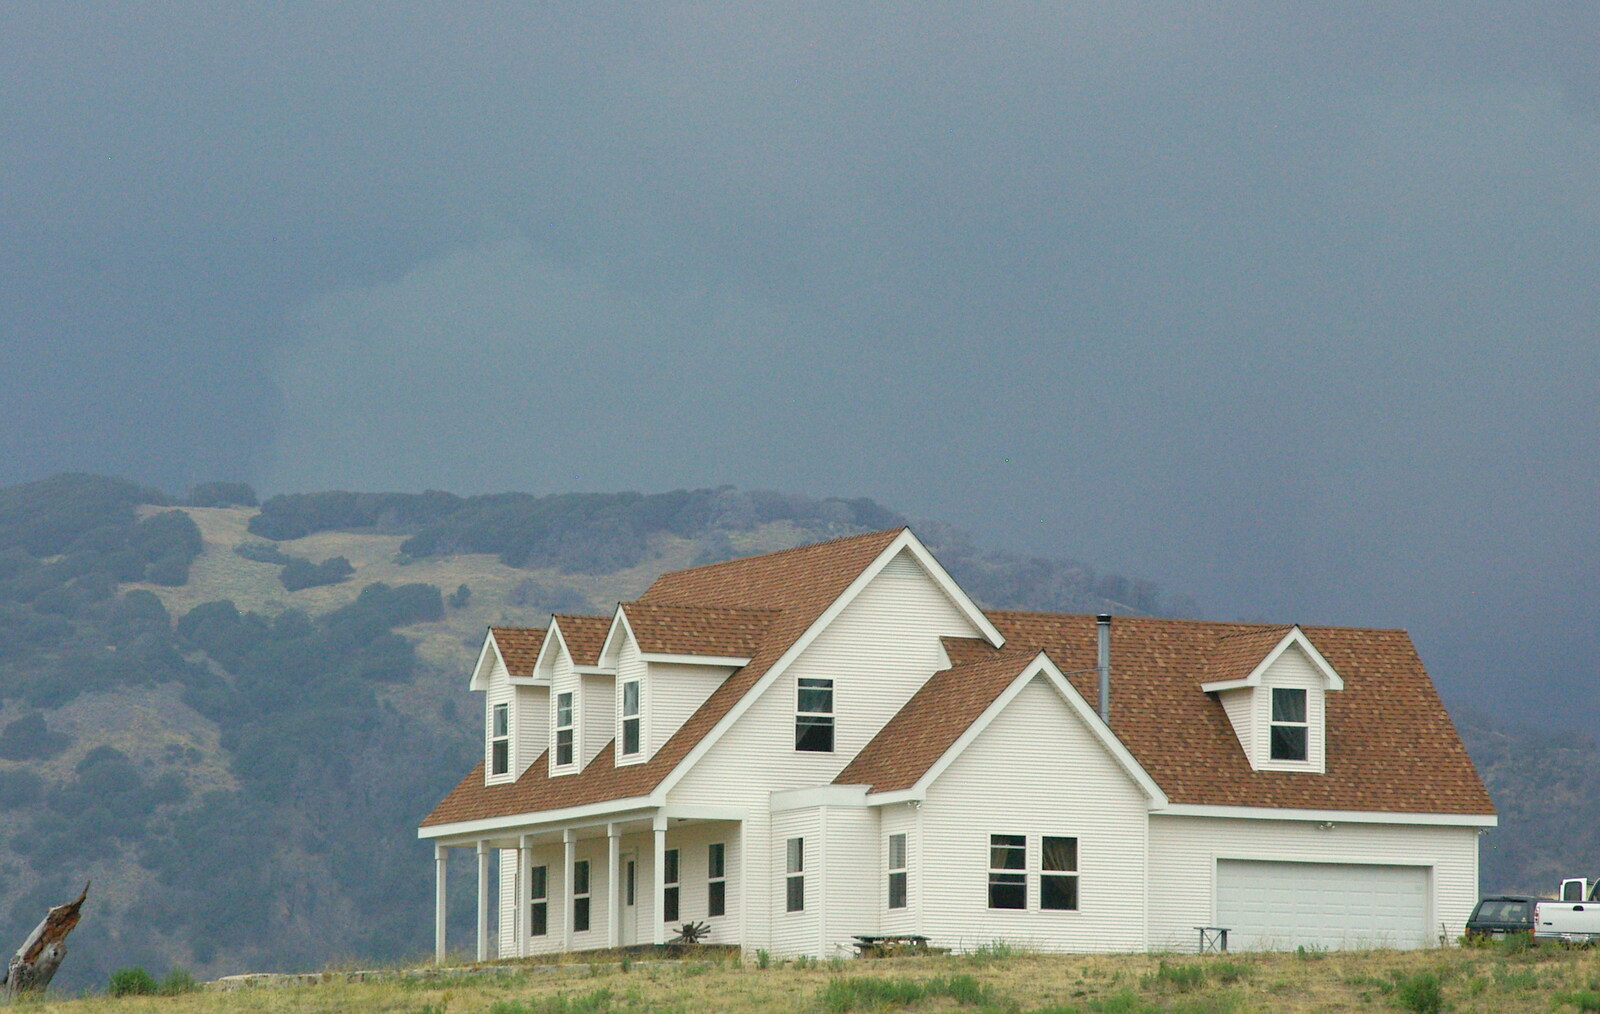 Dark skies amass behind a house on a hill from Route 78: A Drive Around the San Diego Mountains, California, US - 9th August 2005